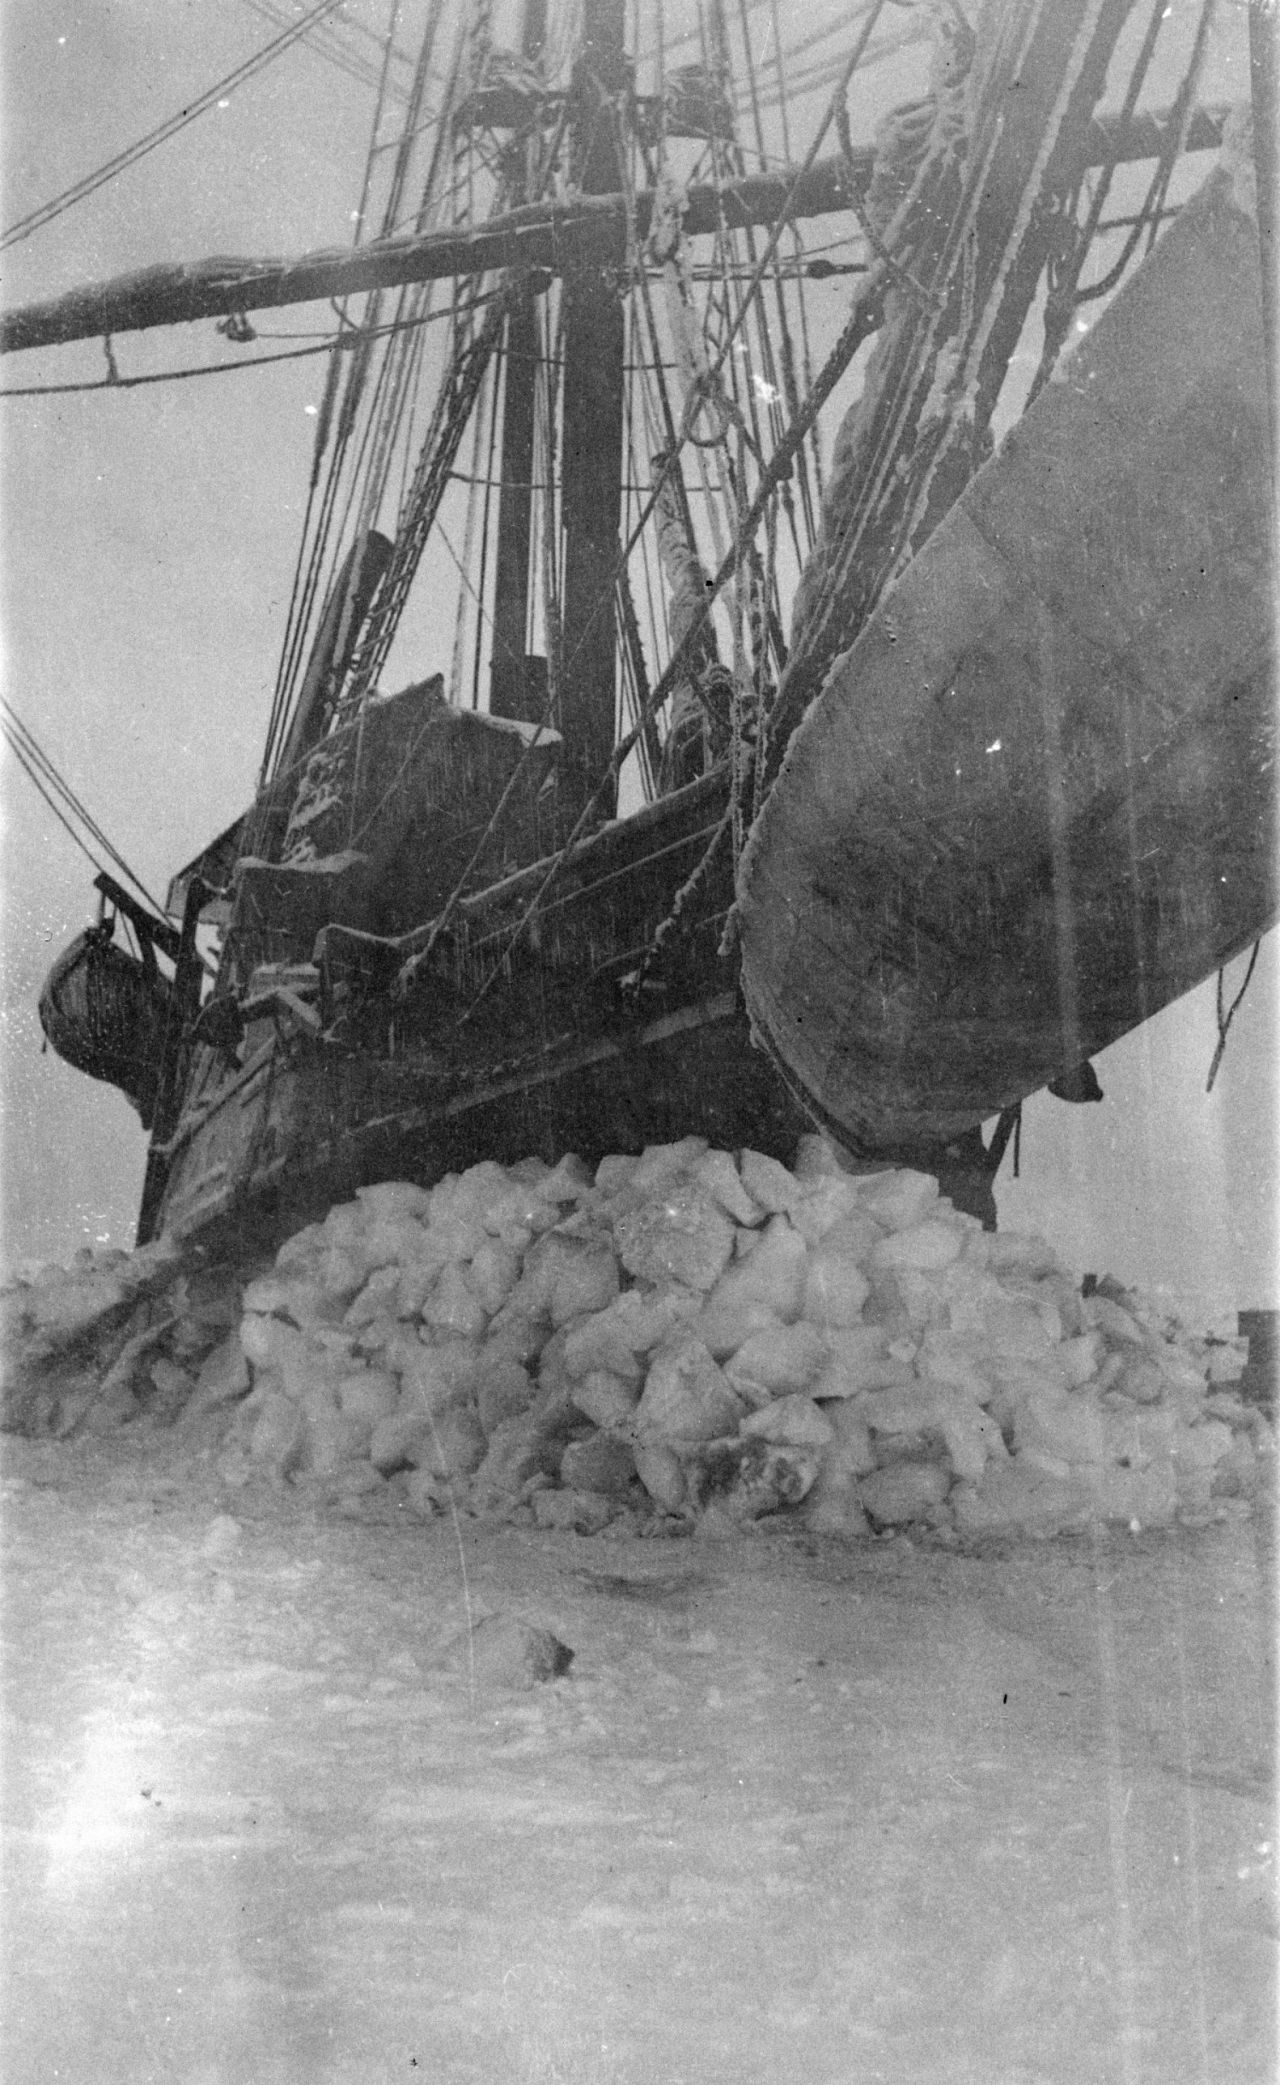 Soon after leaving port in Alaska, the ship encountered the worst summer ice in memory. Trapped, the Karluk was unable to turn back or move forward. Although they were only a few miles from land, they were hundreds of miles from civilization and winter was approaching. 